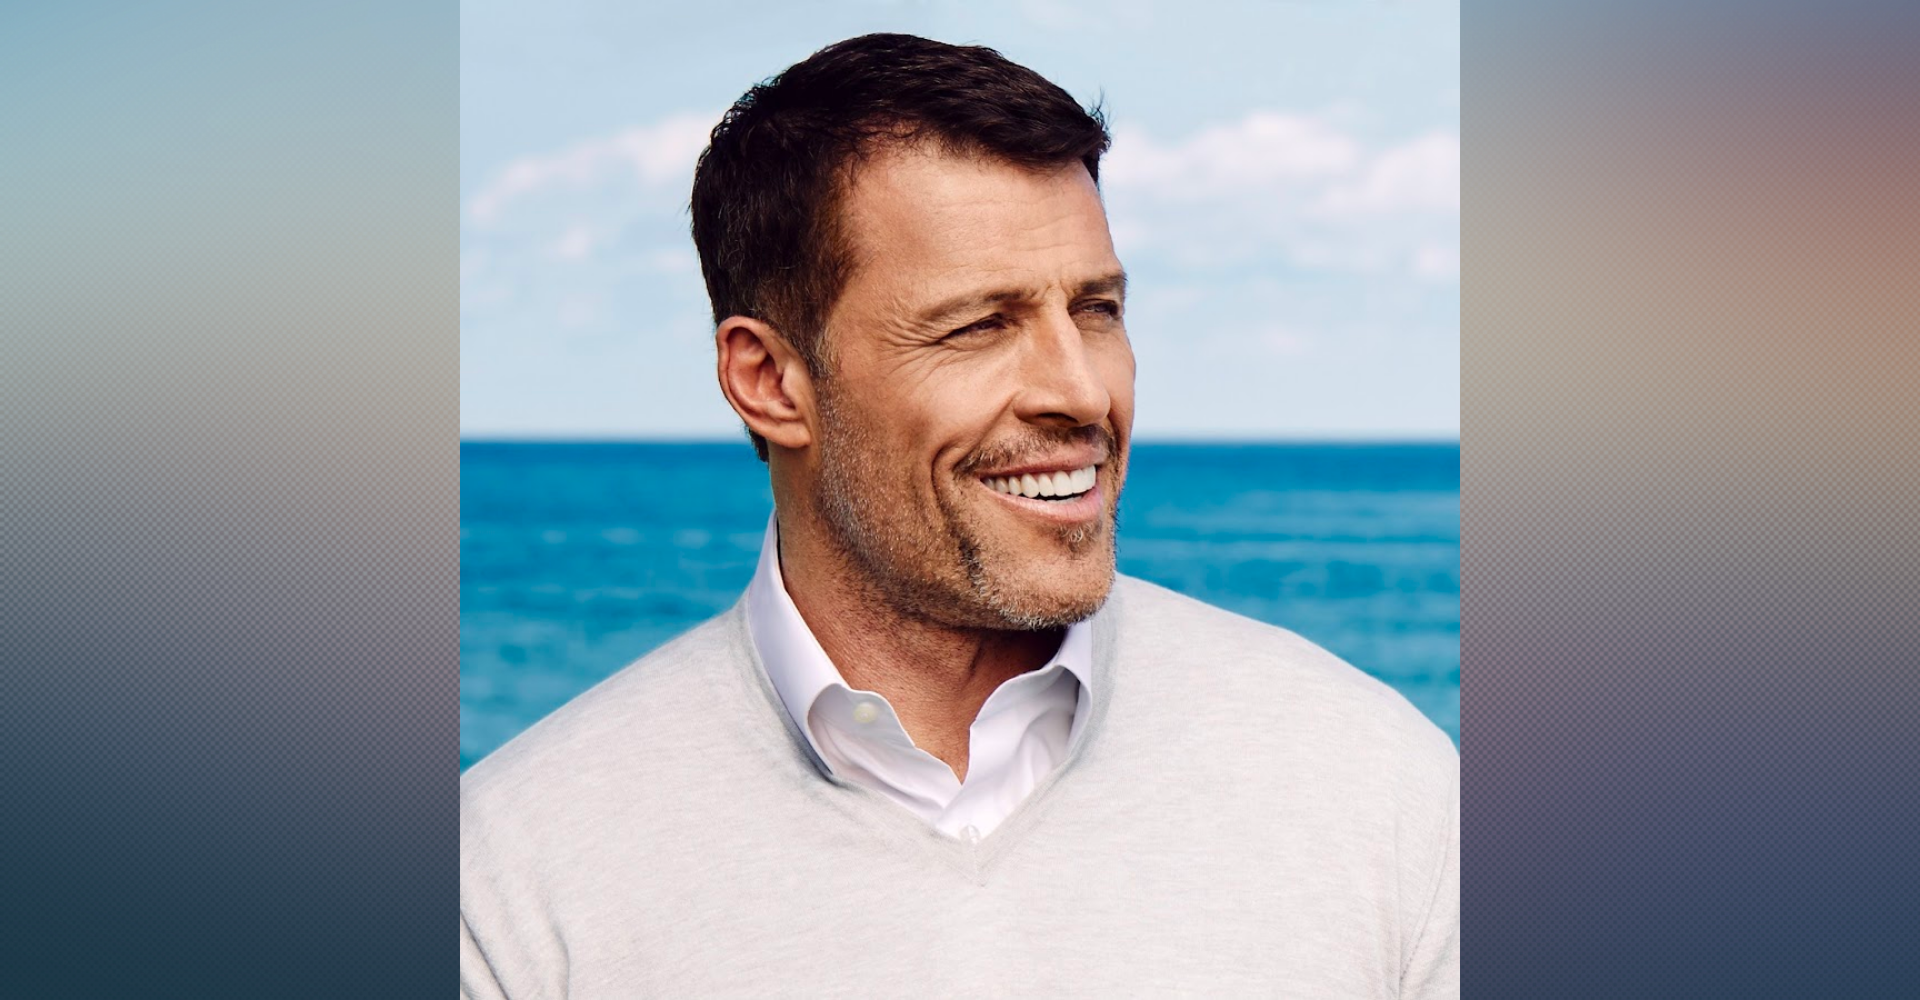 “Happier People Live Longer”: Entrepreneur Tony Robbins Talks to Maria About Science-Backed Solutions for Aging Well From His New Best-Selling Book, Life Force